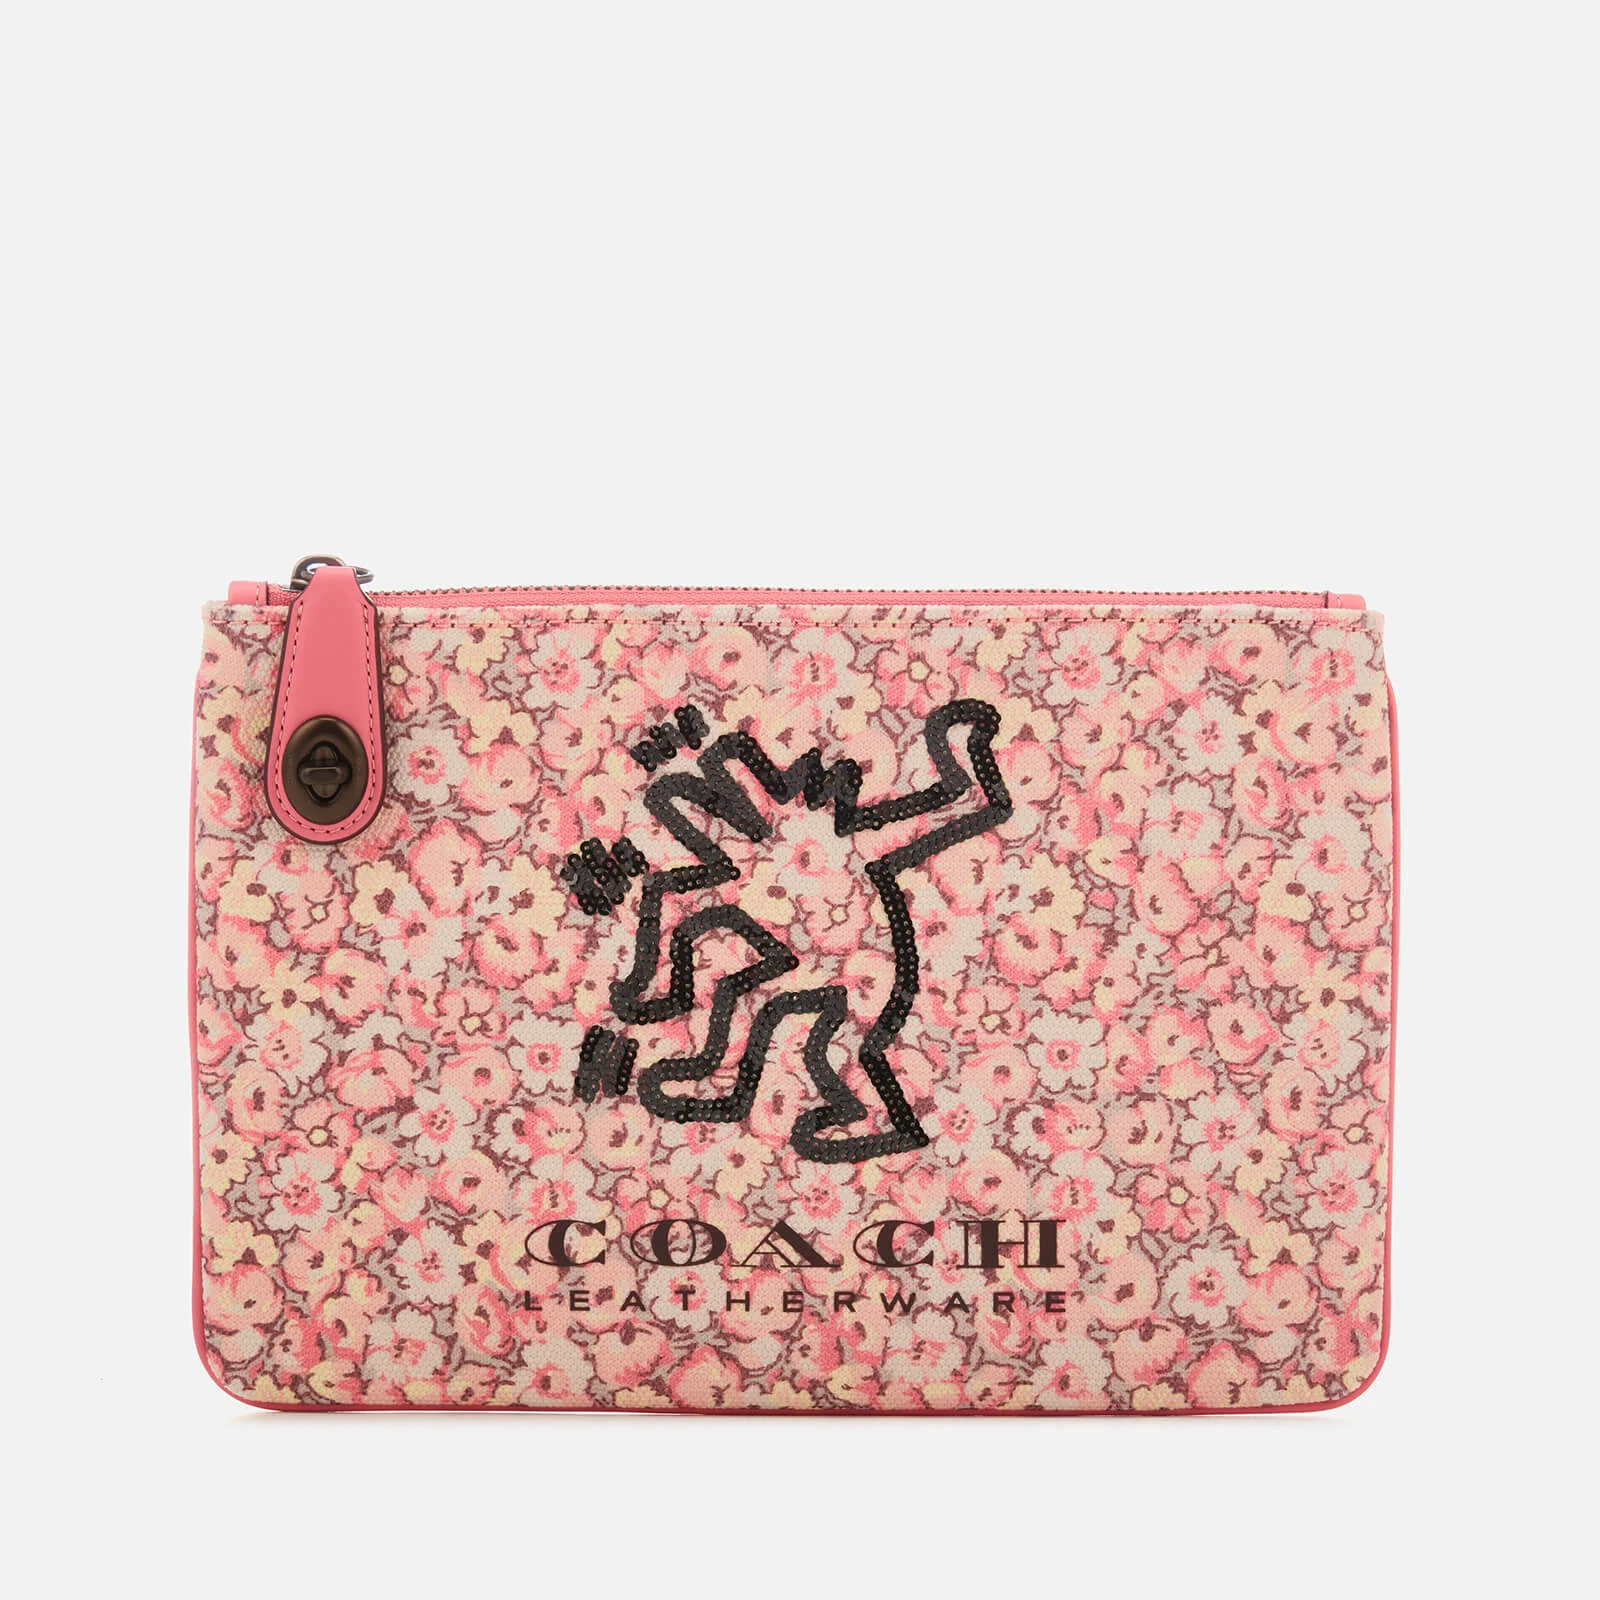 Coach Women's X Keith Haring Turnlock 26 Pouch - Bright Pink Image 1